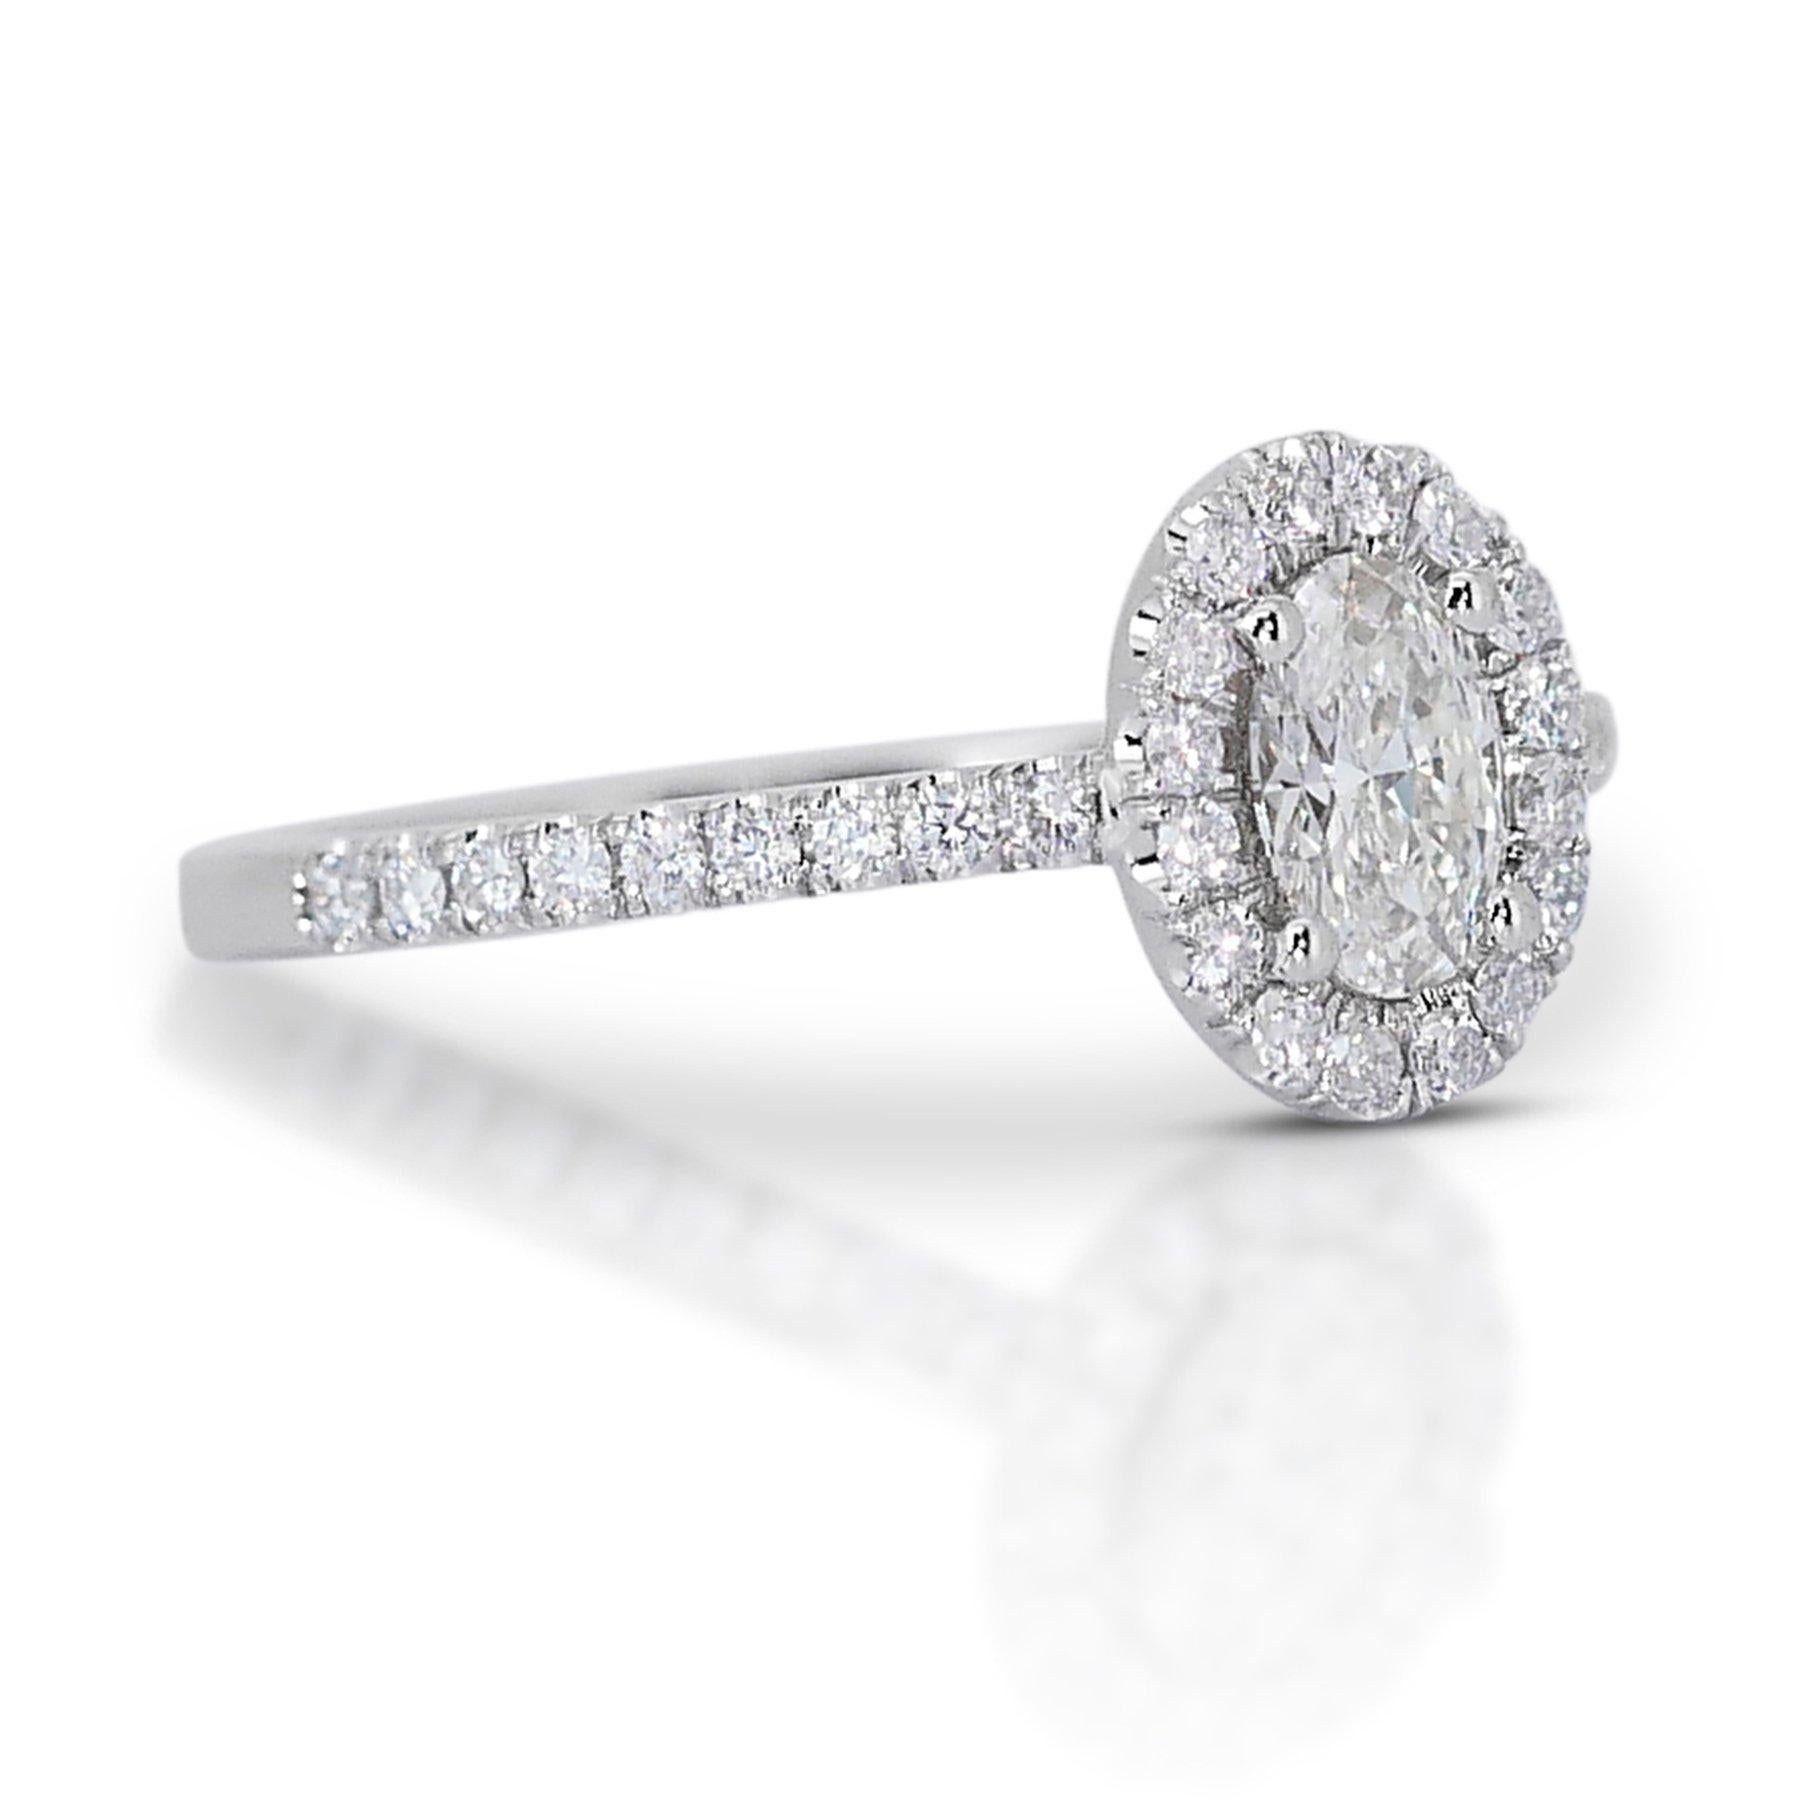 Oval Cut Sparkling 1.00ct Oval Diamond Halo Ring in 18k White Gold - GIA Certified